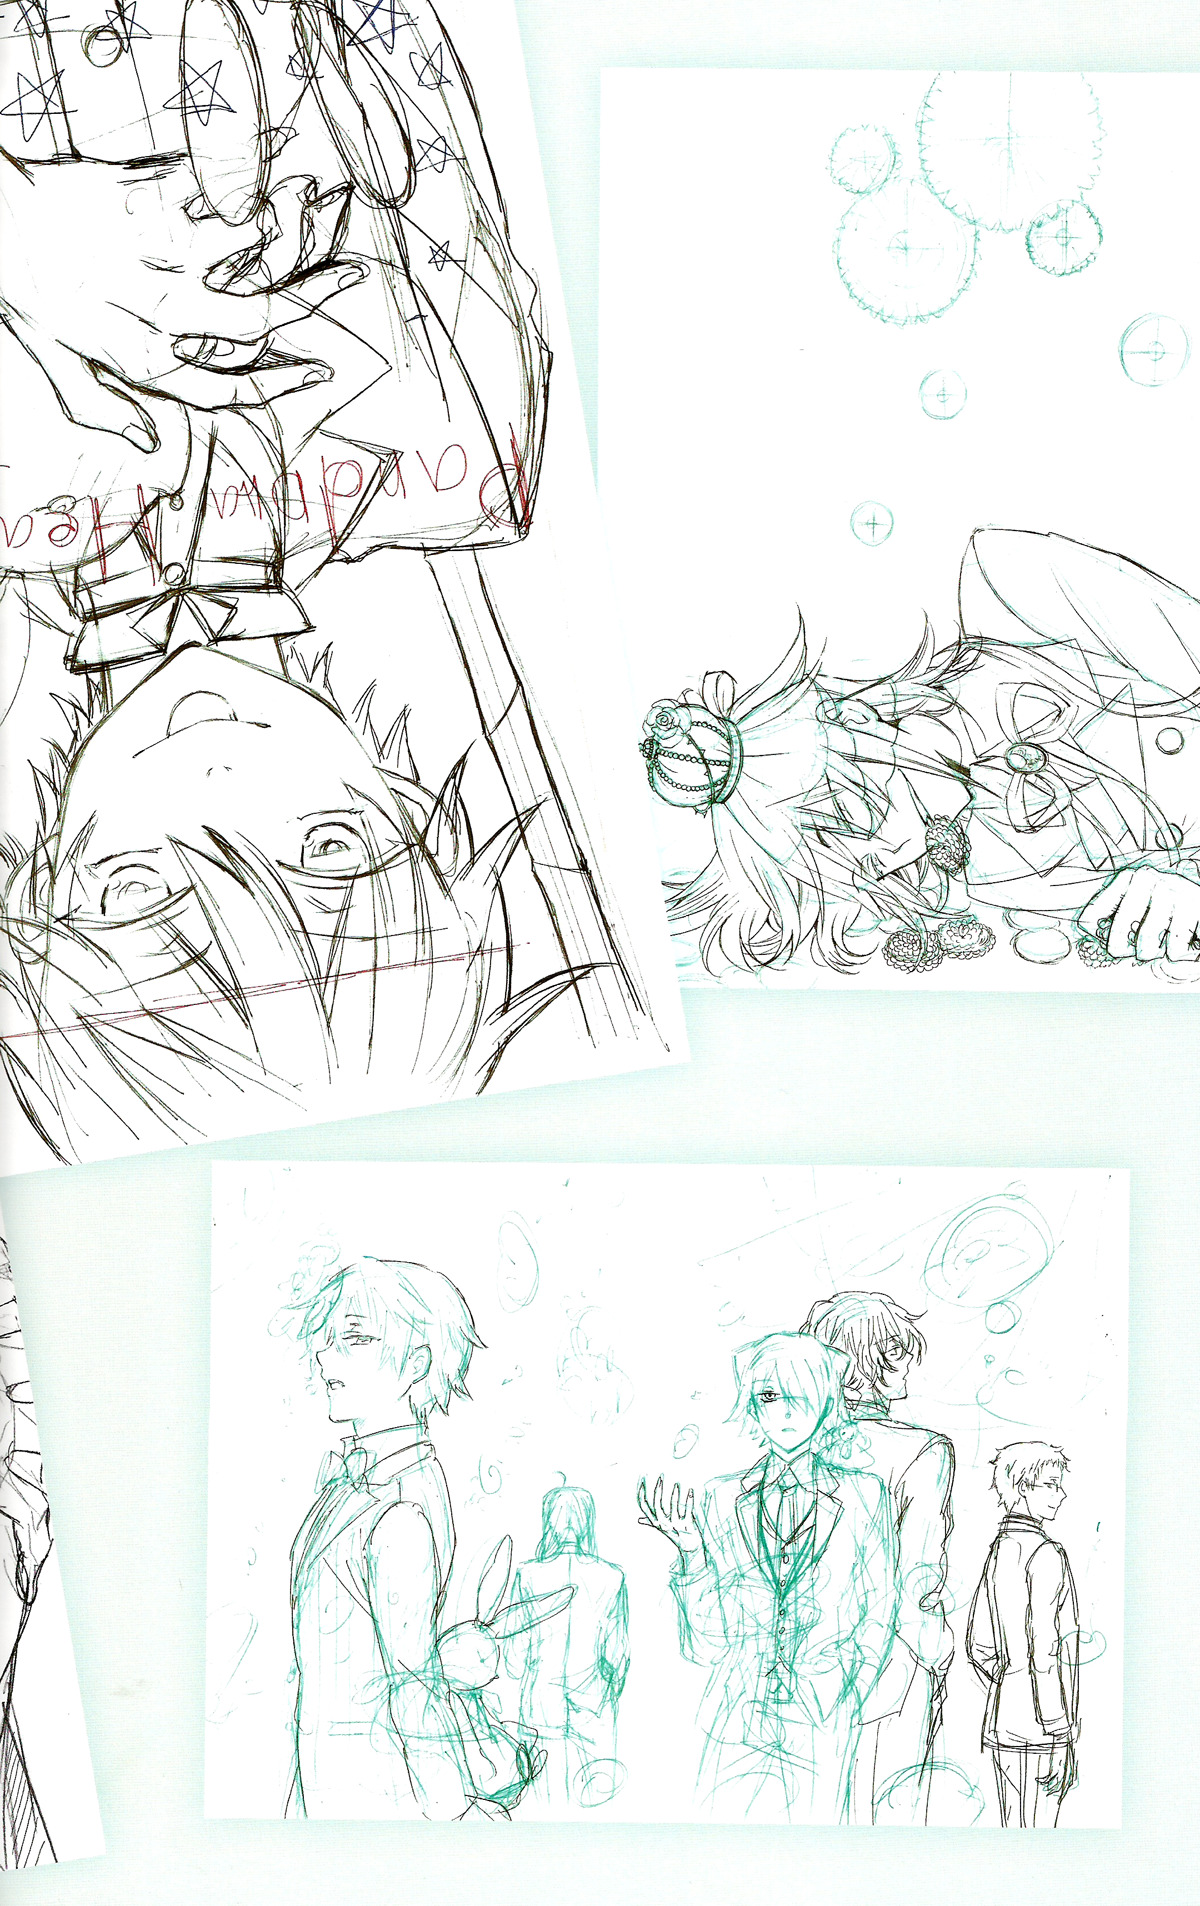 e-ck:  Pandora Hearts Artbook “There is” - Rough sketches